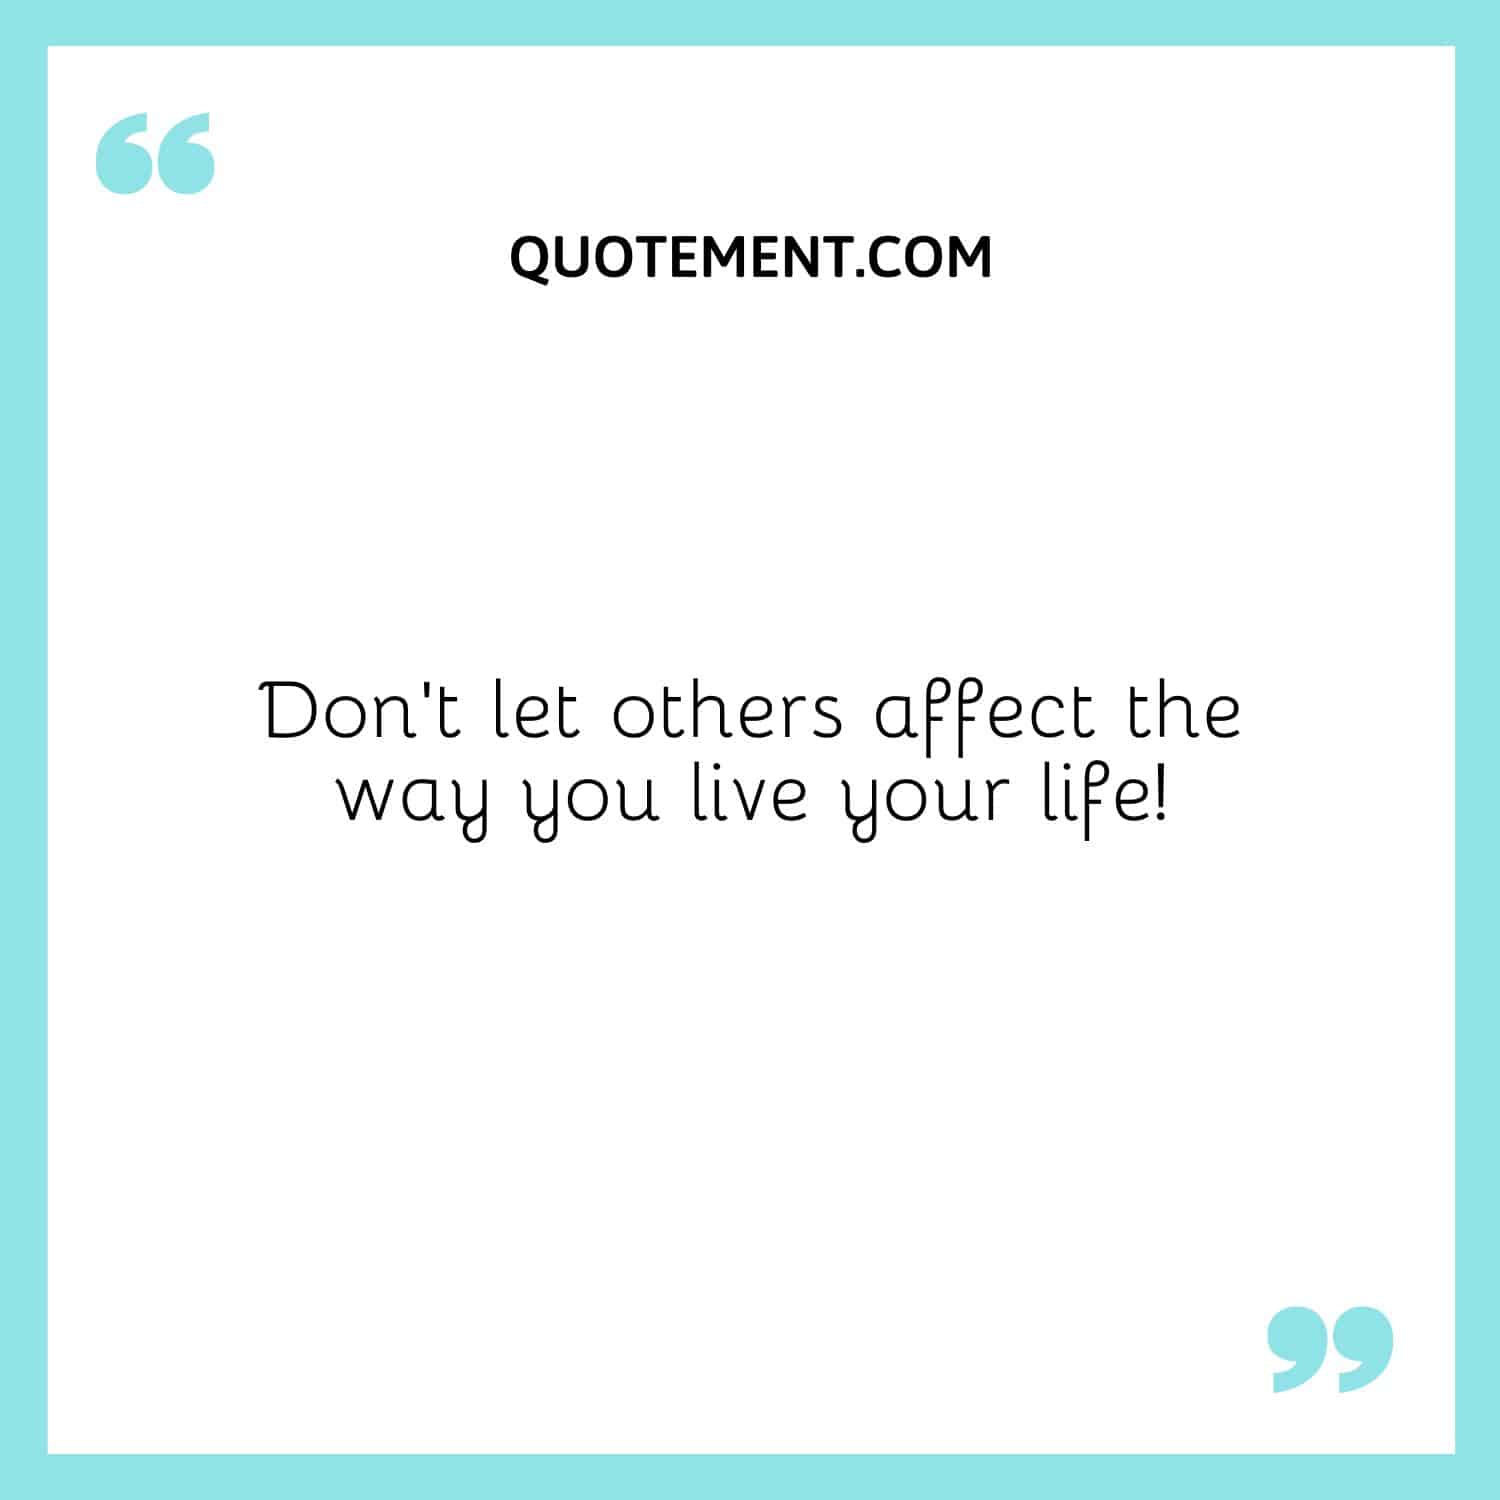 Don’t let others affect the way you live your life